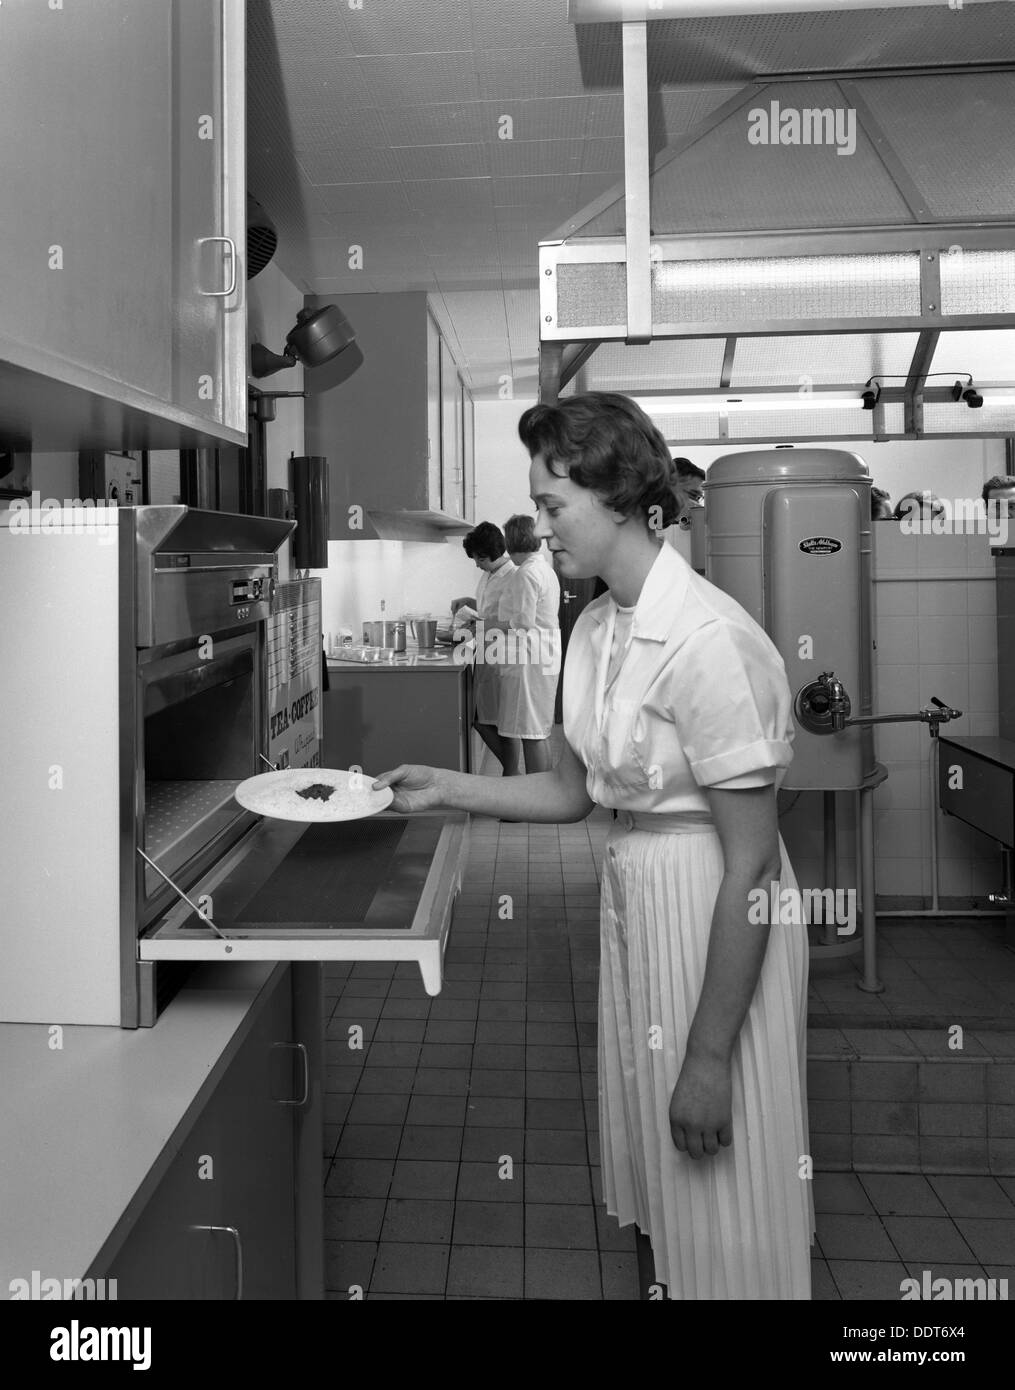 Experimental catering kitchen, Batchelors Foods, Sheffield, South Yorkshire, 1966. Artist: Michael Walters Stock Photo